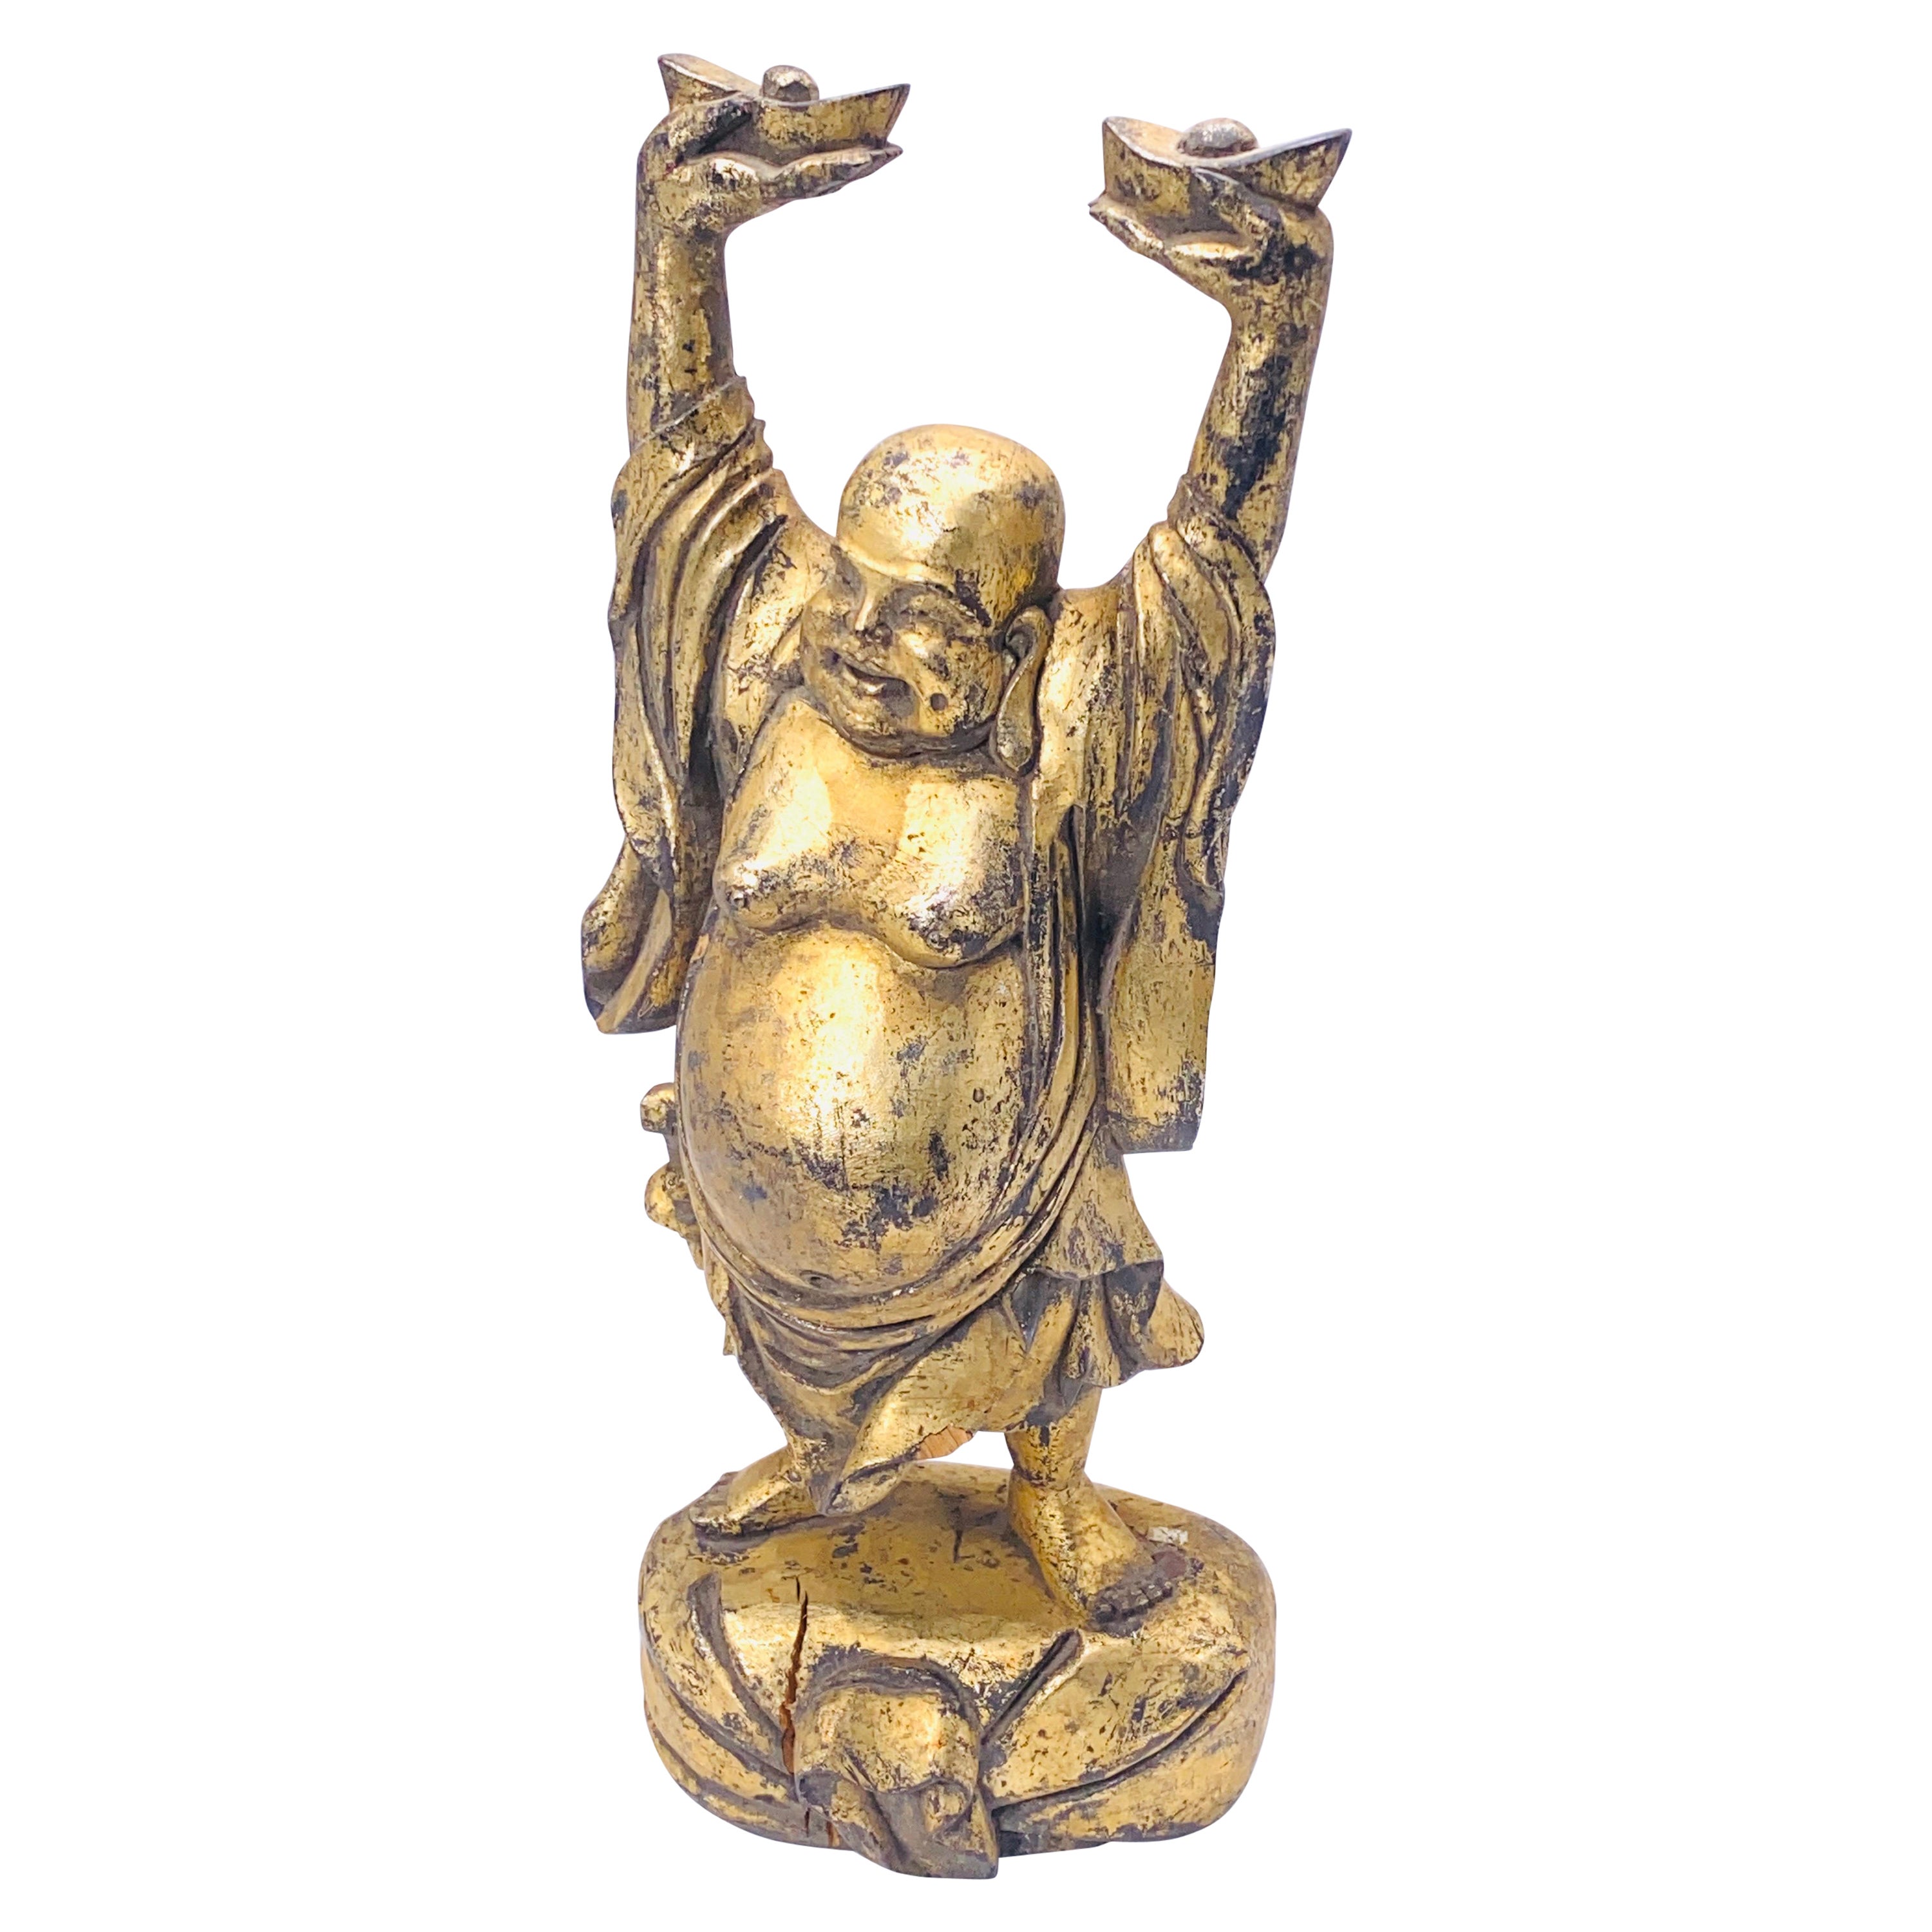 Patinated Wooden Sculpture, Representing Buddha, Early 20th Century, Gilt Color